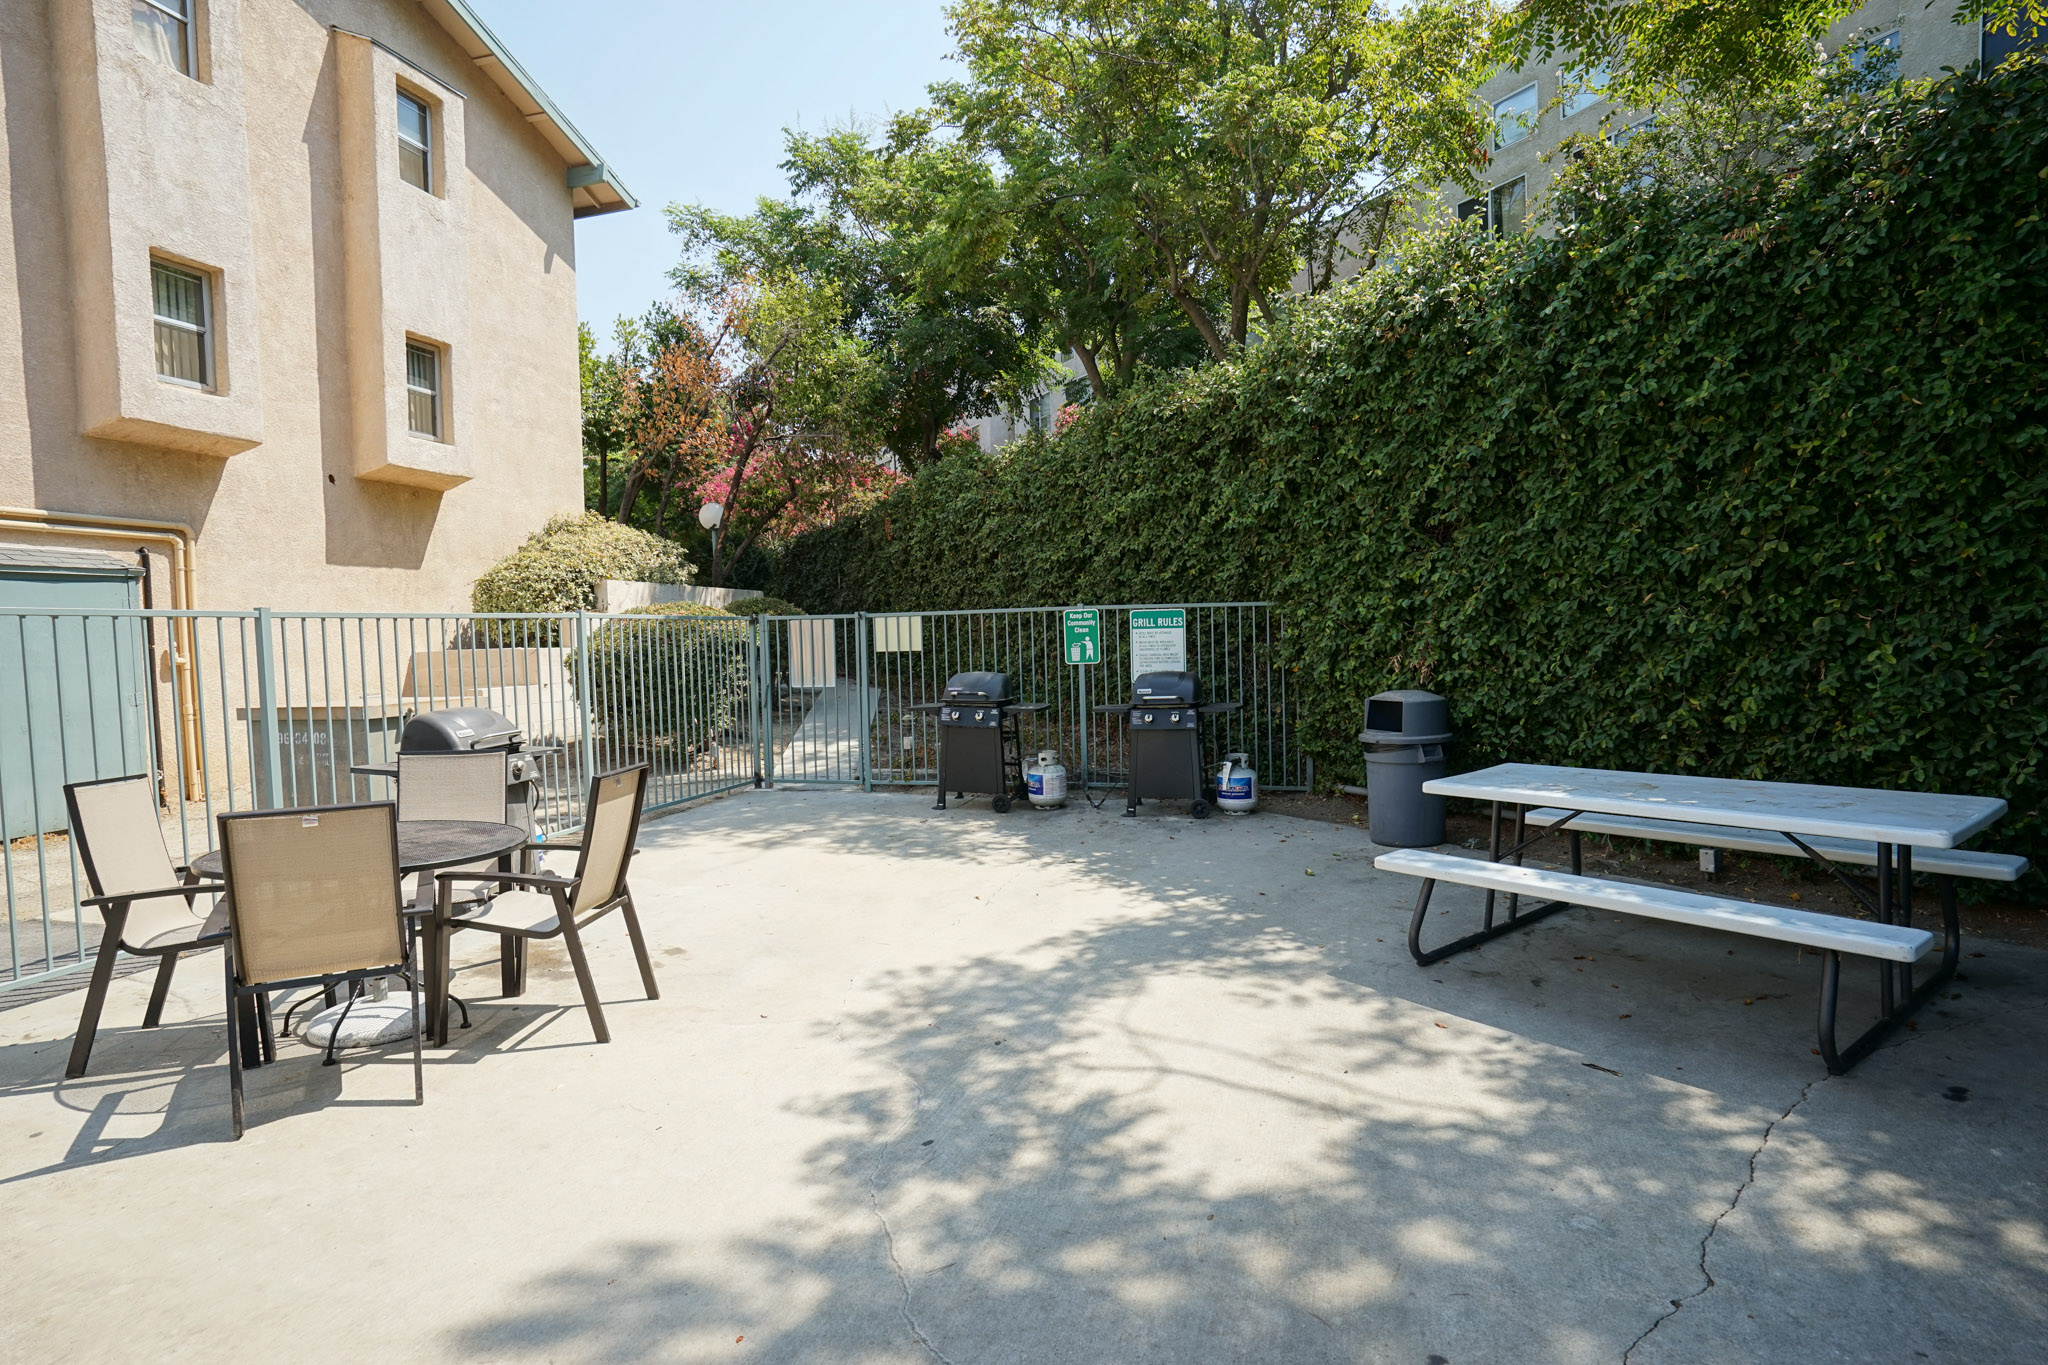 View of a fenced patio area with a grills and two table sets. On one side of the area there is a hedge, and the other side shows a three story building.